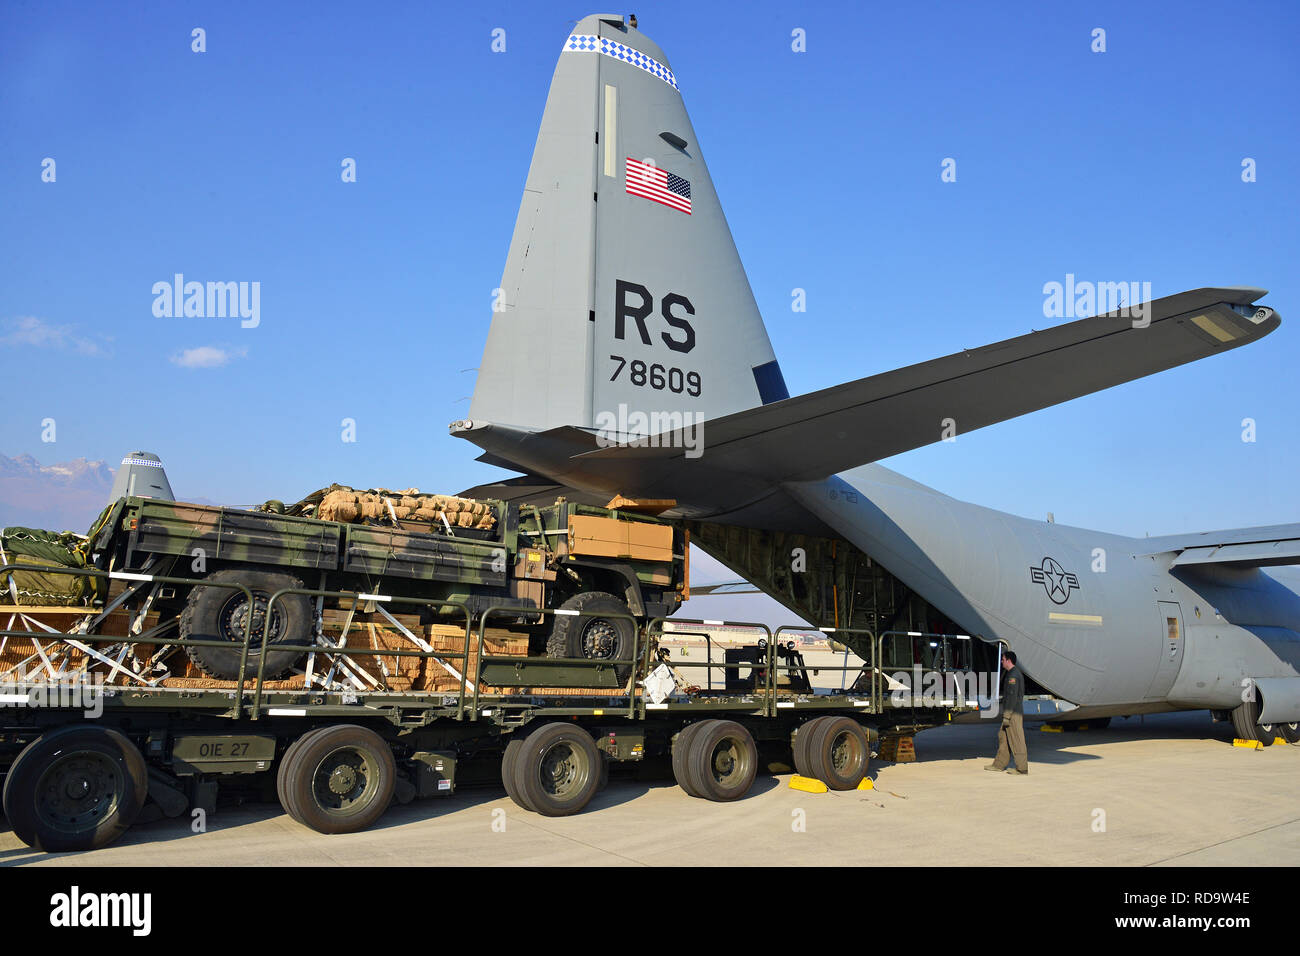 One Light Medium Tactical Vehicle from the Echo Company, Brigade Engineer Battalion, 173rd Airborne Brigade, are rigged for a heavy parachute drop and prepared to be loaded into a U.S. Air Force C-130 Hercules from the 86th Air Wing during Spartan Exercise at Aviano Air Base, Italy, January 14, 2019,. The 173rd Airborne Brigade is the U.S. Army Contingency Response Force in Europe, capable of projecting ready forces anywhere in the U.S. European, Africa or Central Commands' areas of responsibility . (U.S. Army photo by Paolo Bovo) Stock Photo